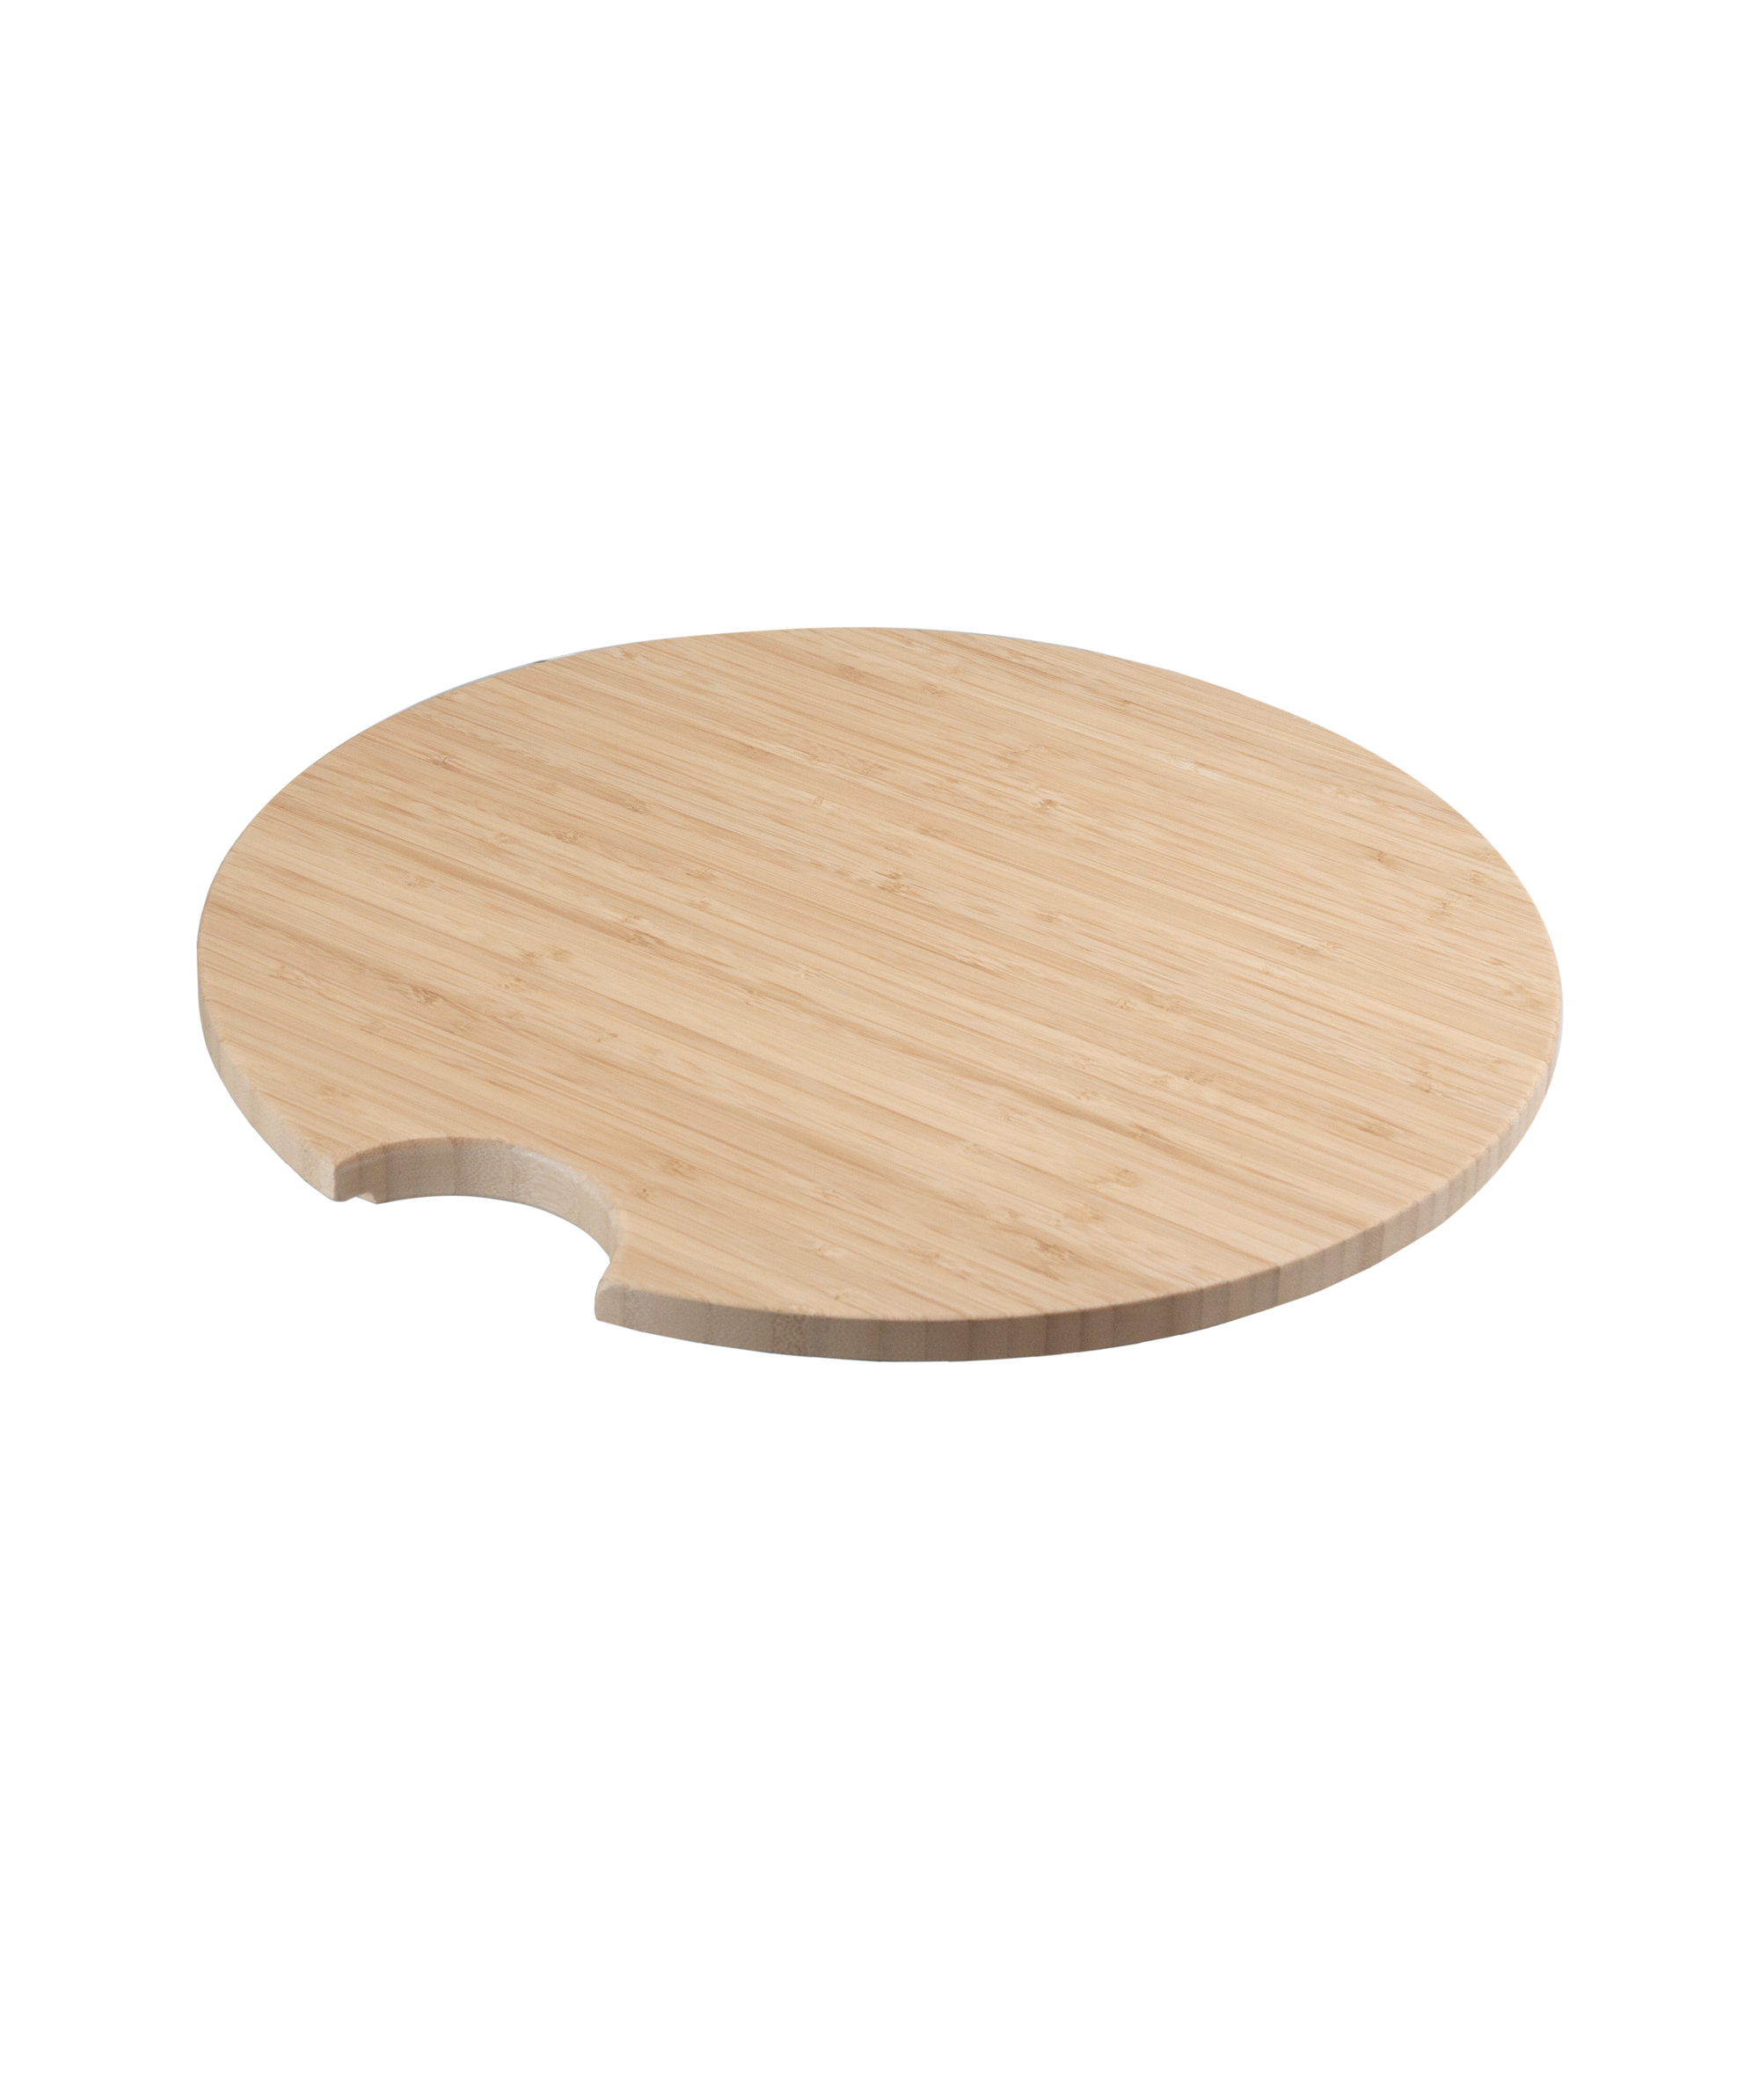 Cutting Board 08 - for Acero 446 stainless steel sink